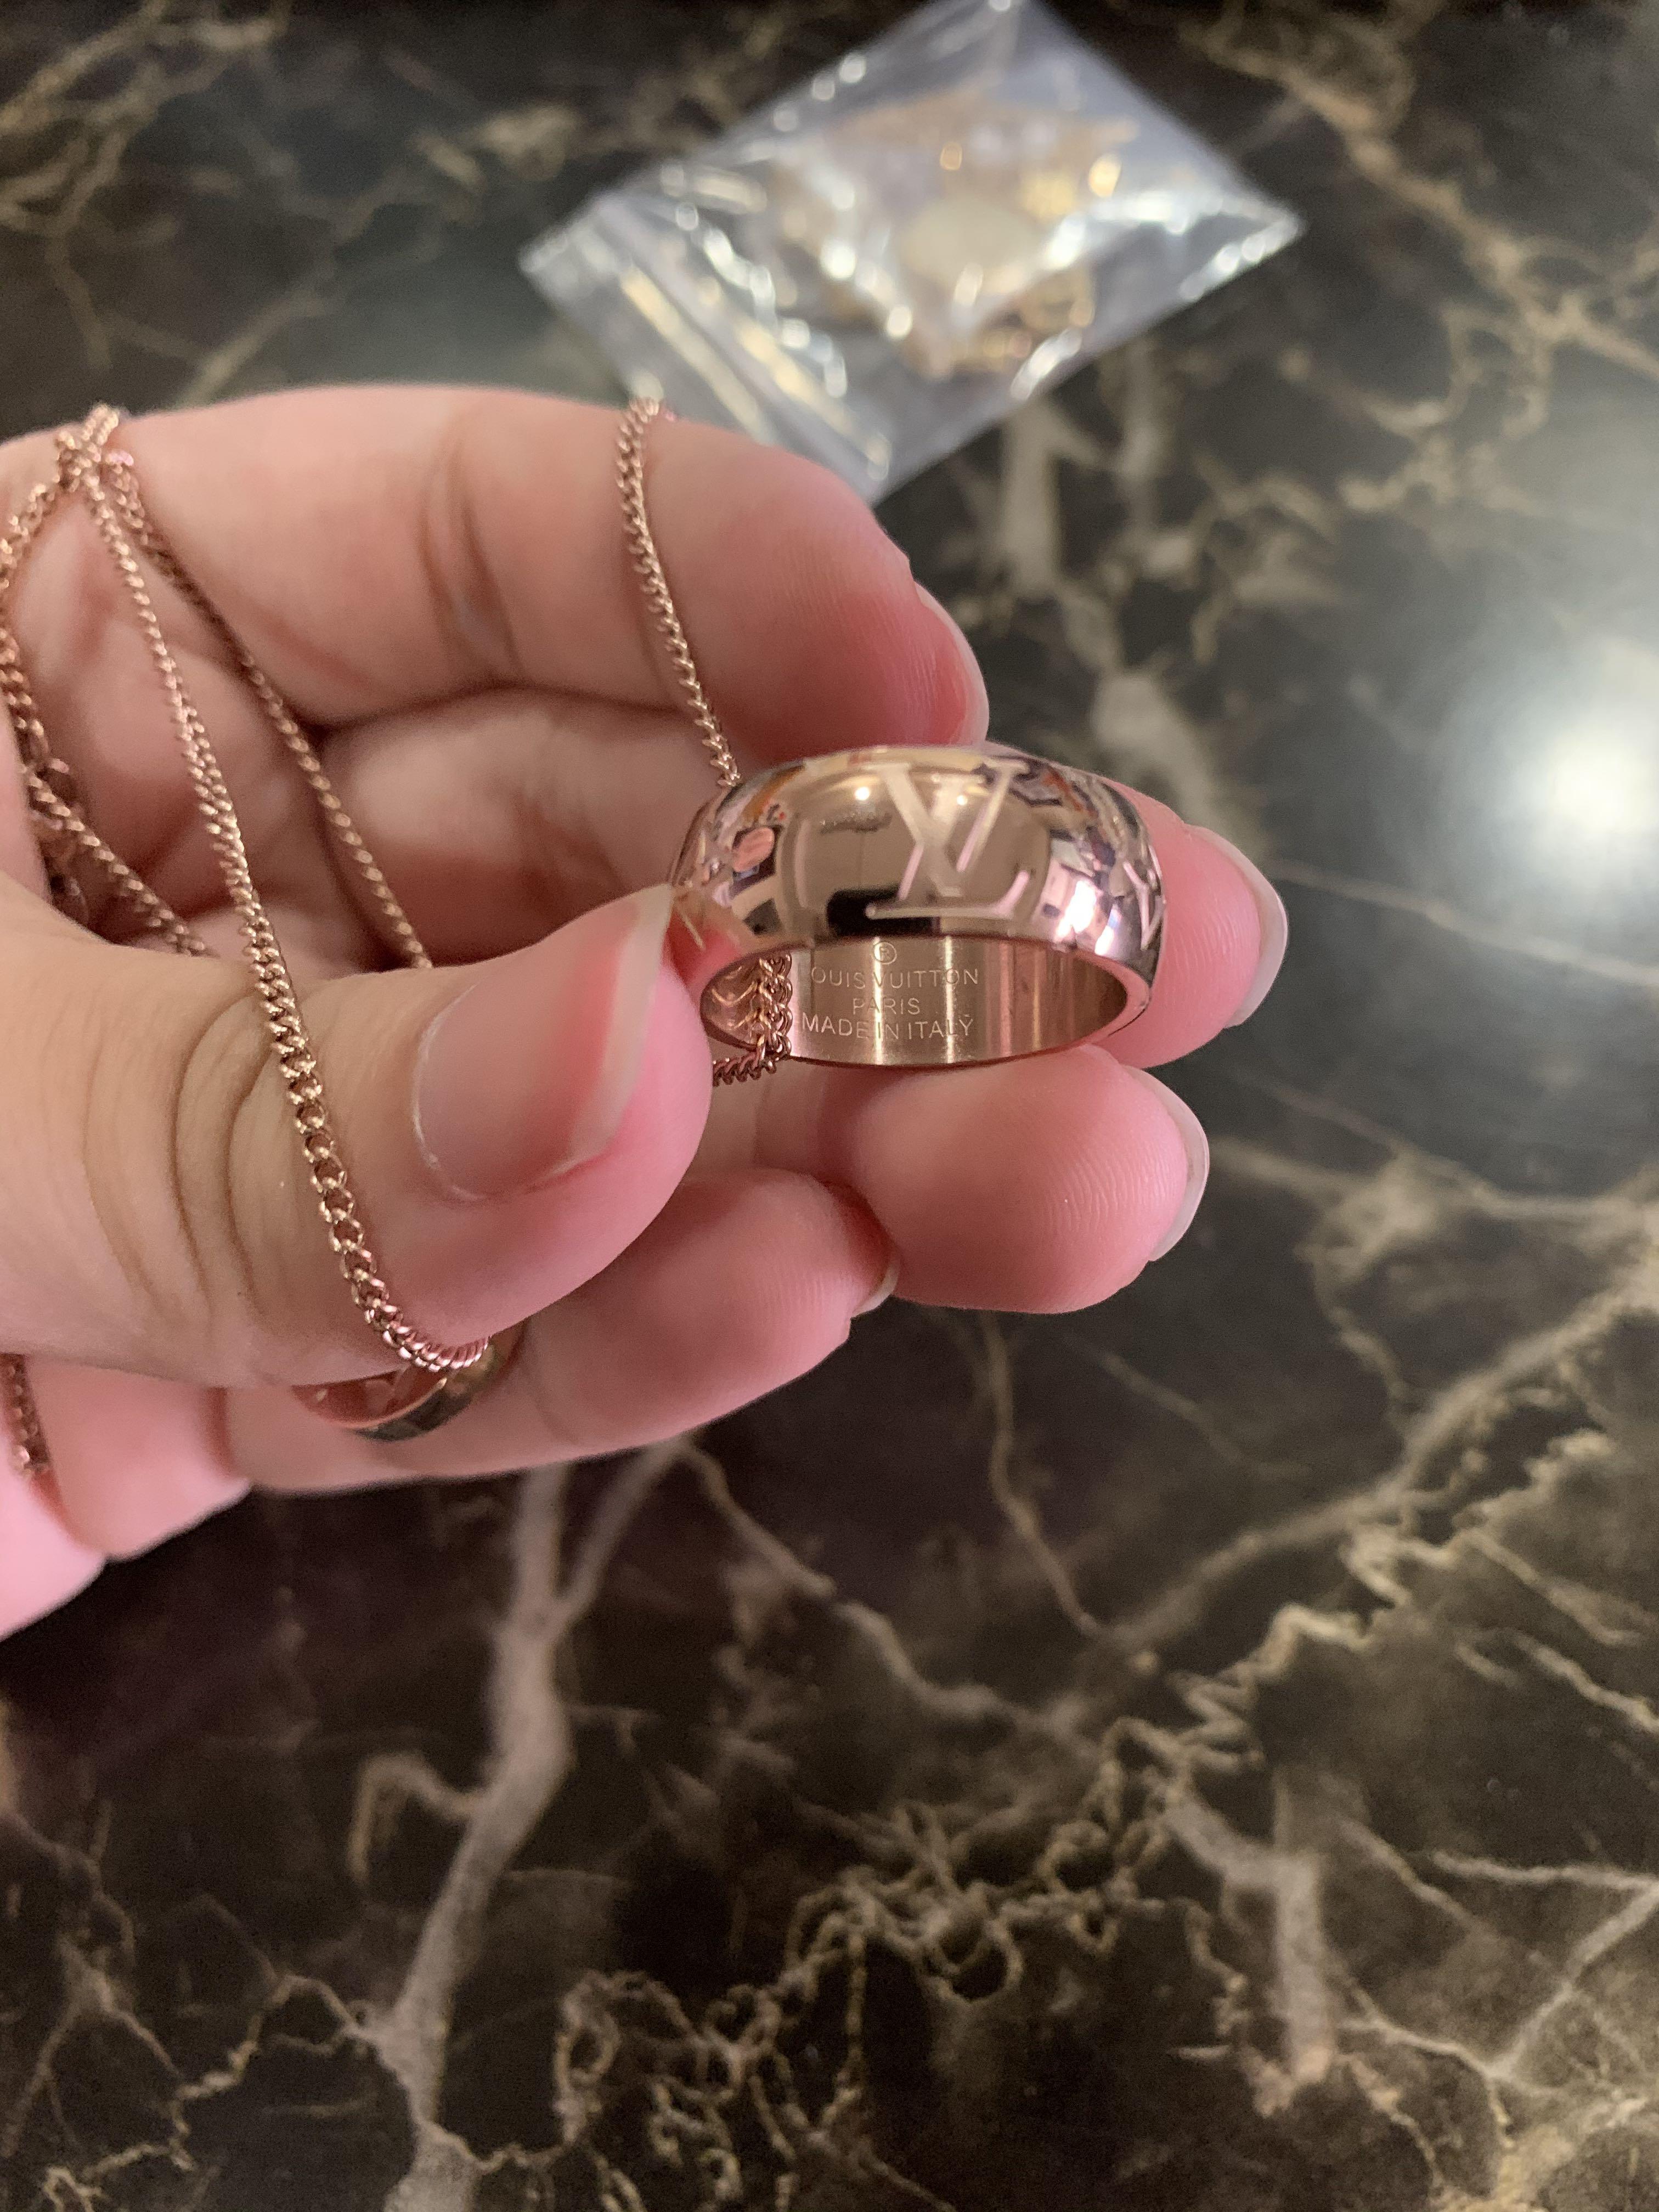 BNIB LV 3 in 1 Necklace (ring removable)